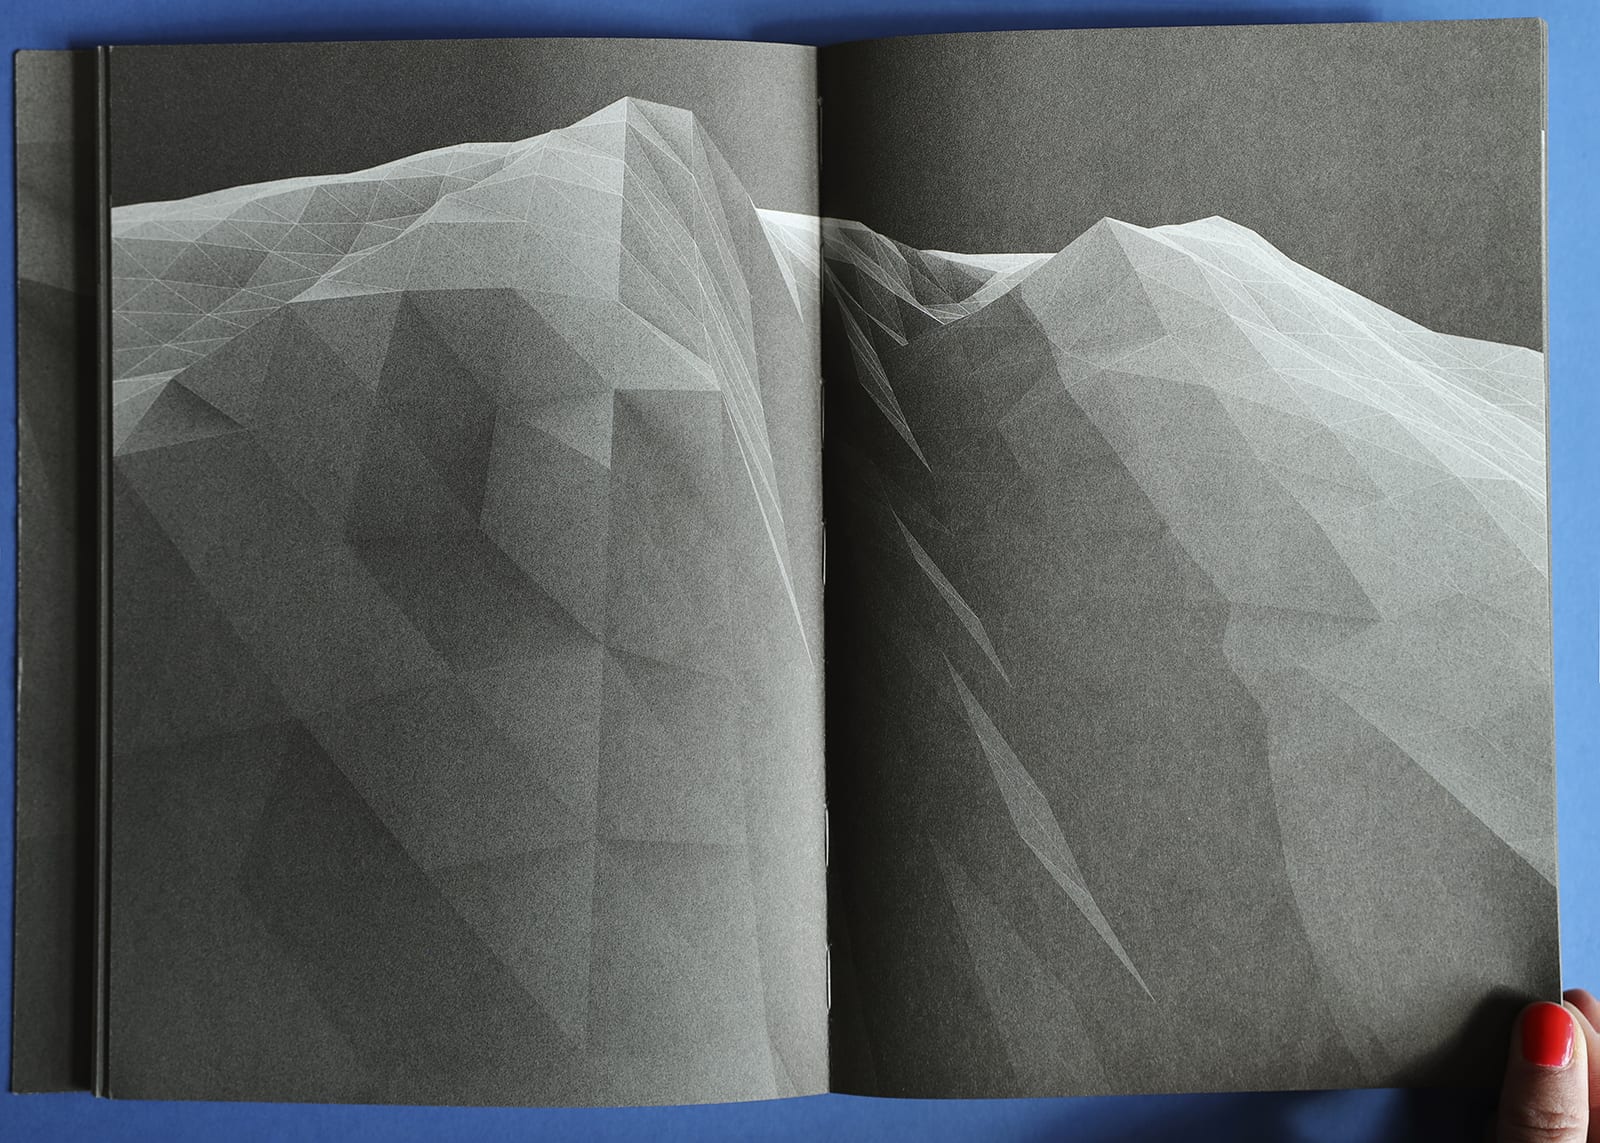 Open-book spread of Imaginary Explosions. Black-and-white graphic of mountain topography.